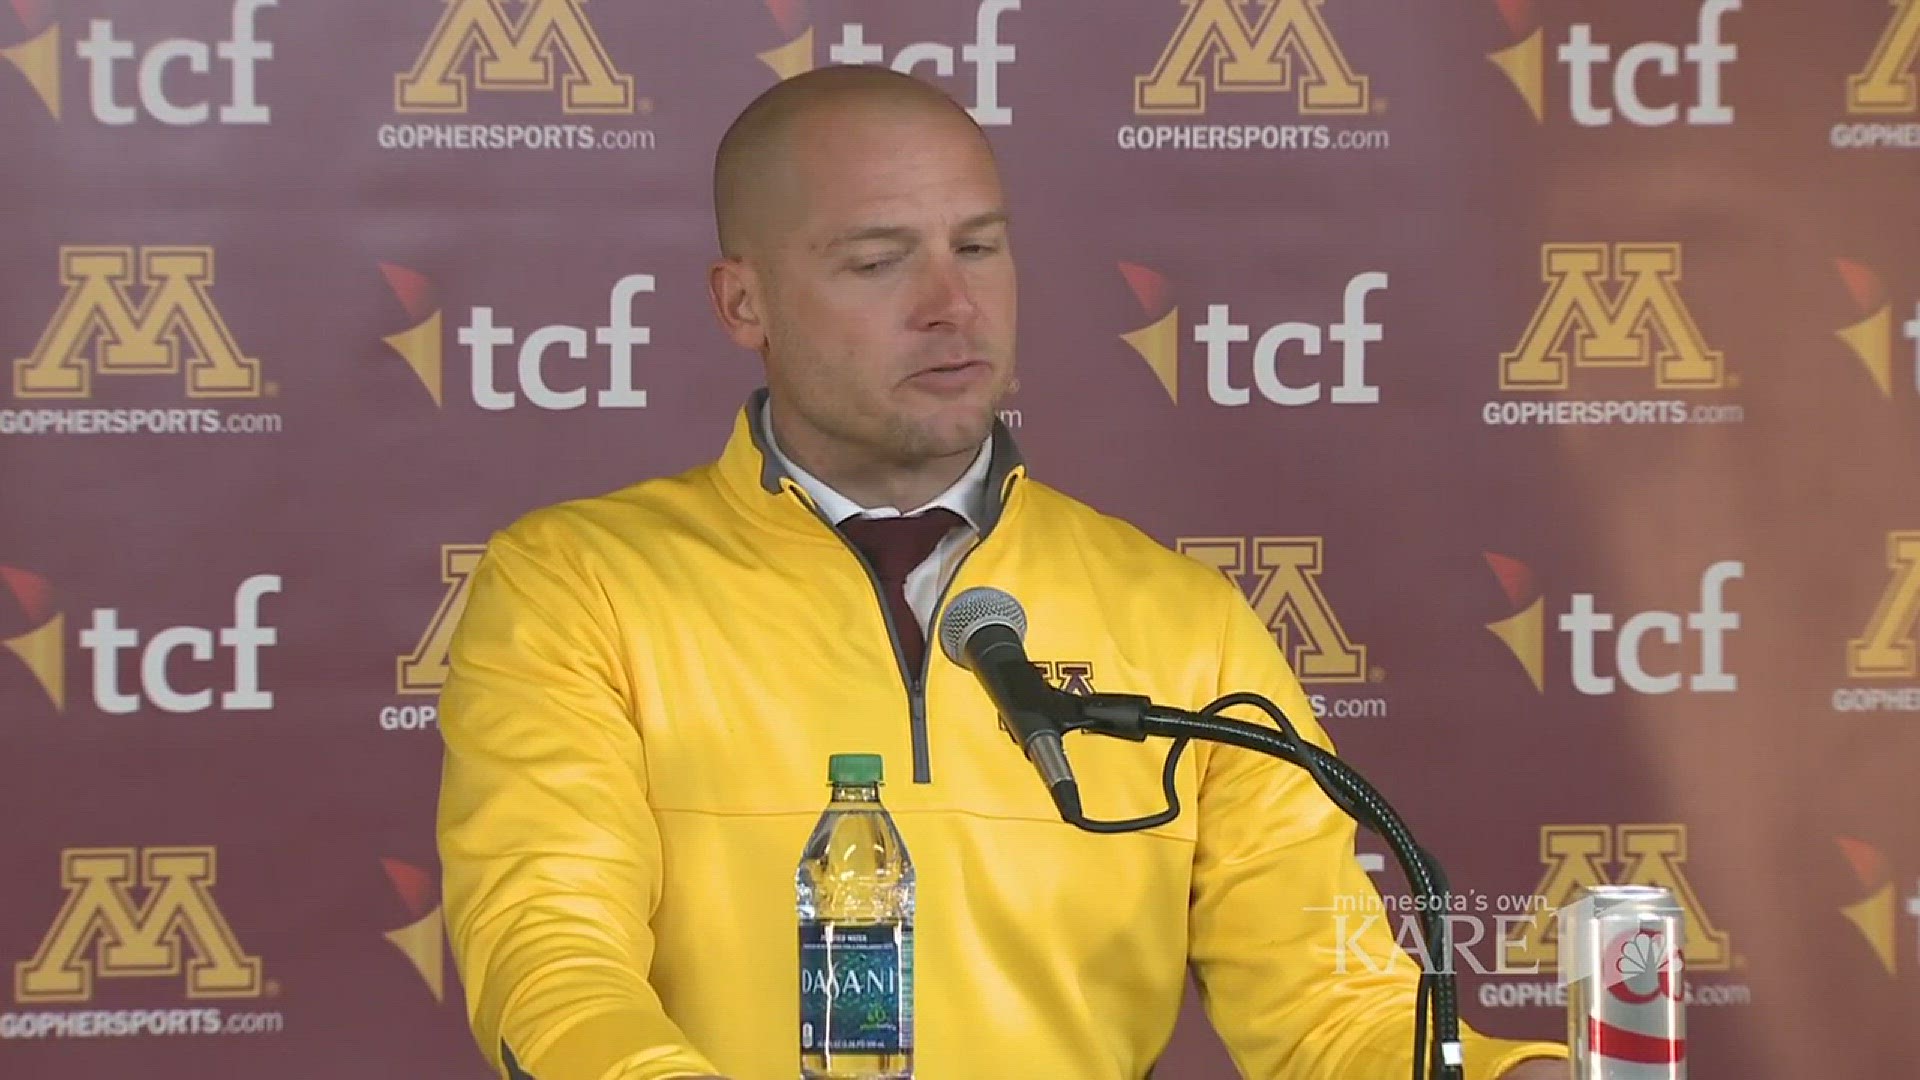 Coach PJ Fleck and Gophers football players react to their disappointing 31-0 loss to the Wisconsin Badgers Saturday afternoon in Minneapolis.